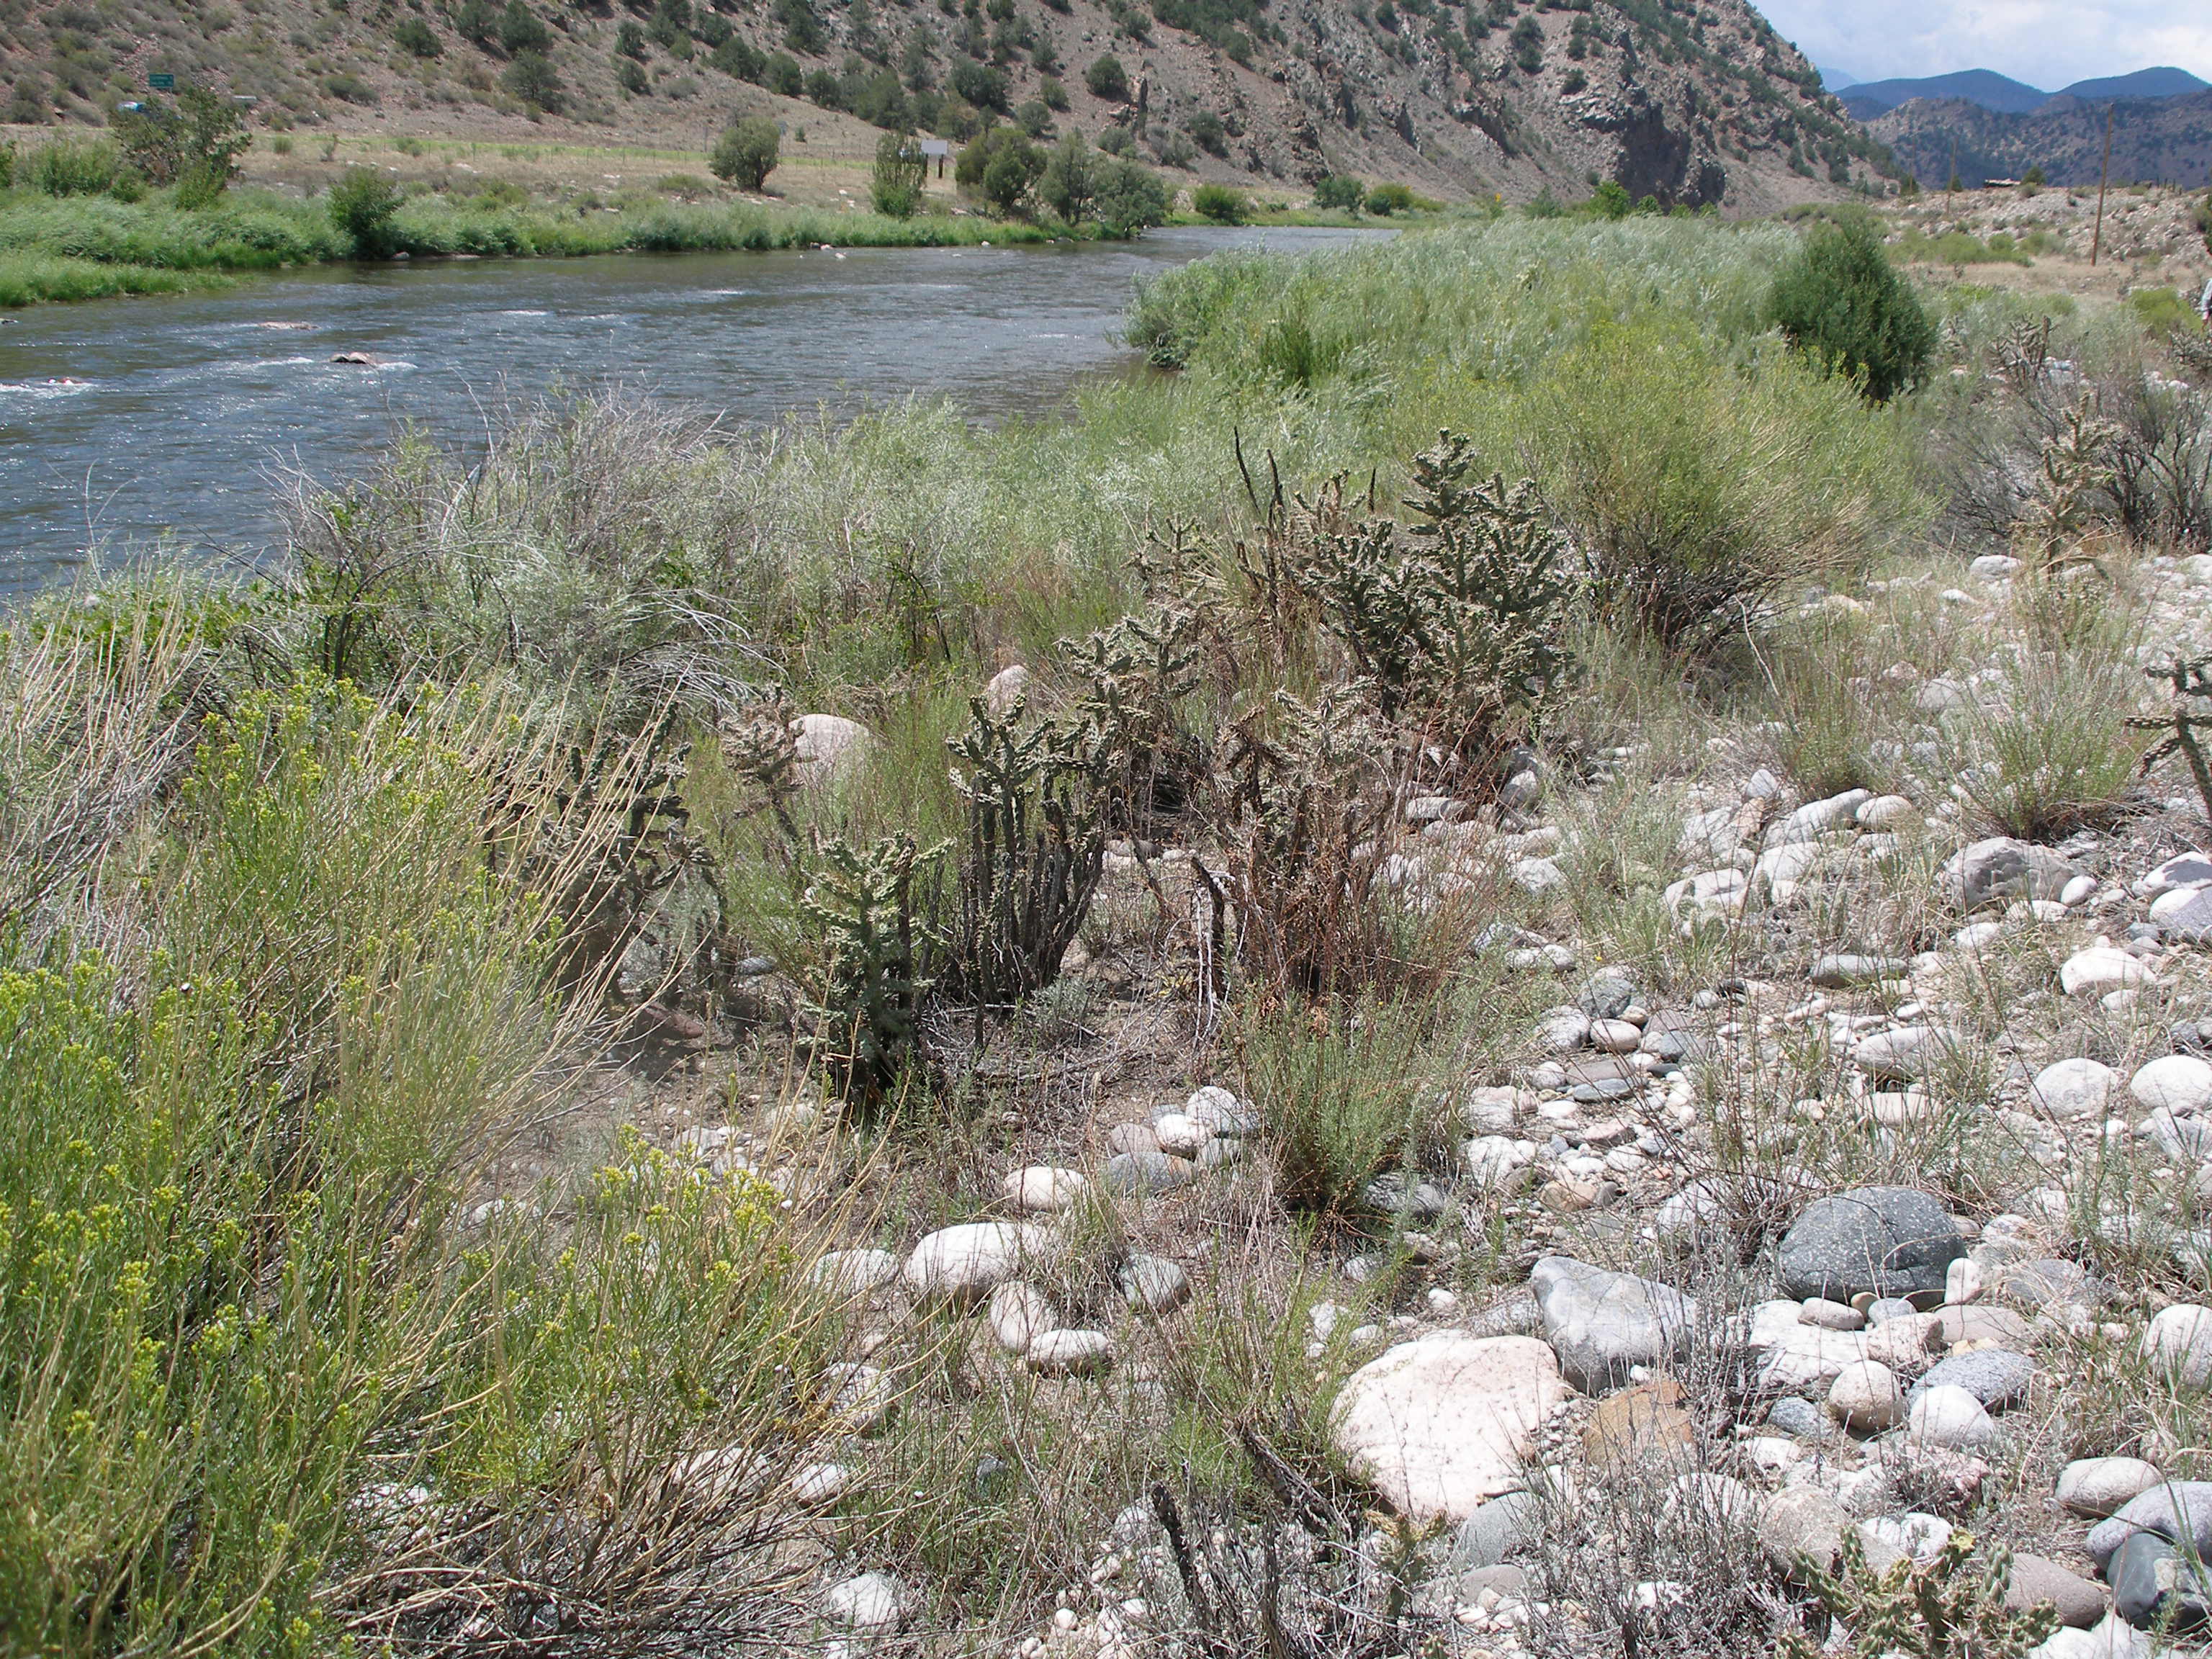 View Upstream from Texas Creek